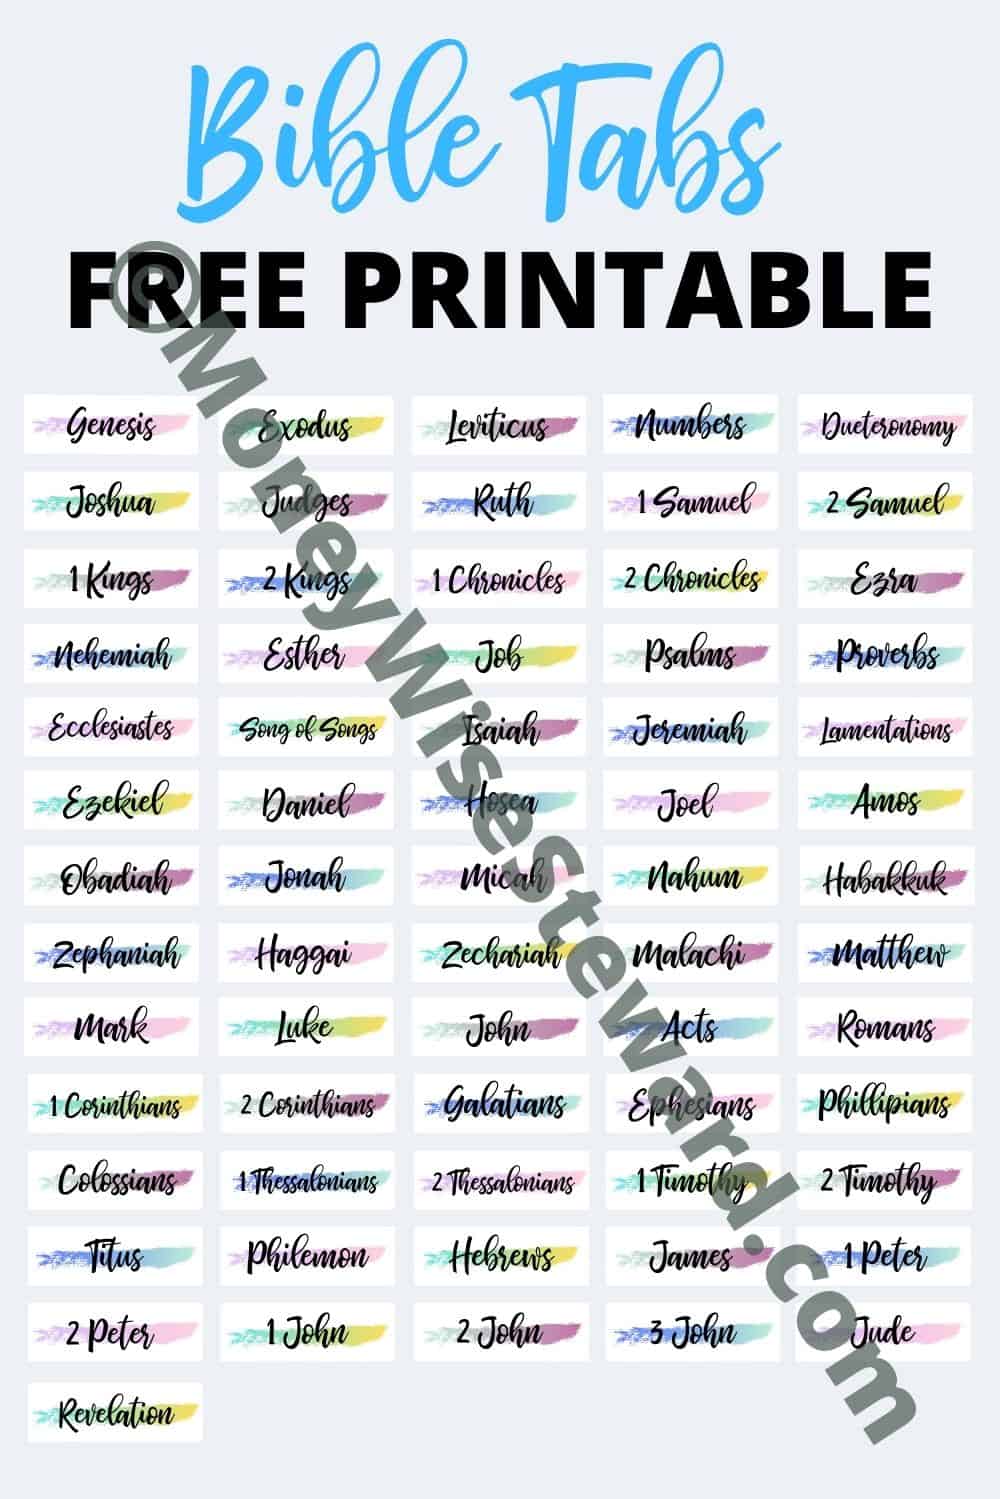 The Best Bible Tabs Plus Get A Free Printable